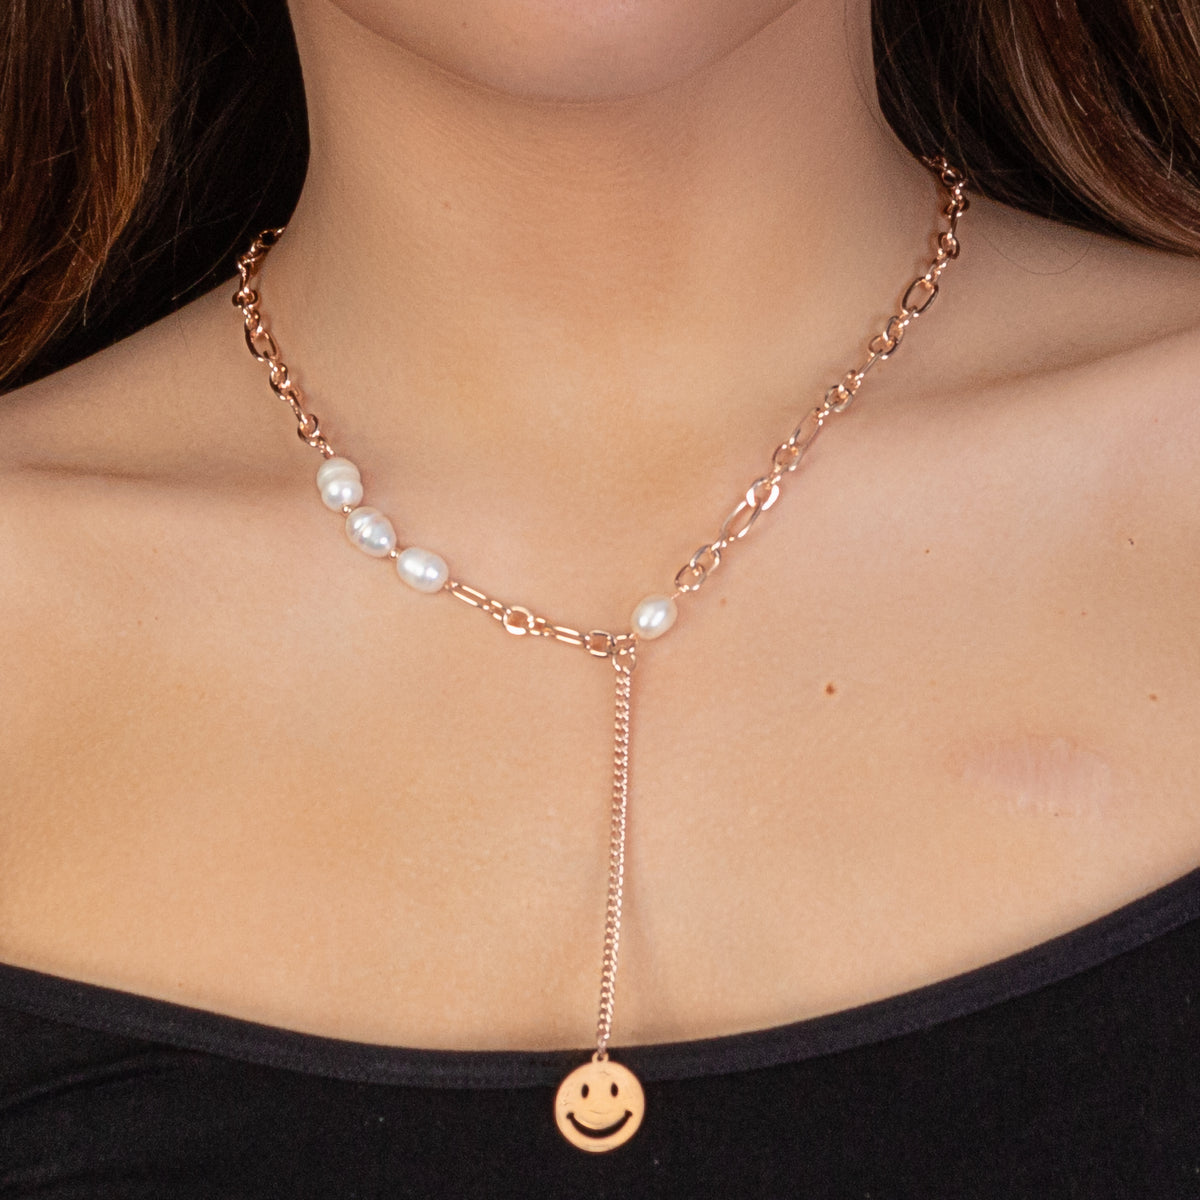 1128 - Dainty Smiley Face Pendant Necklace - Rose Gold